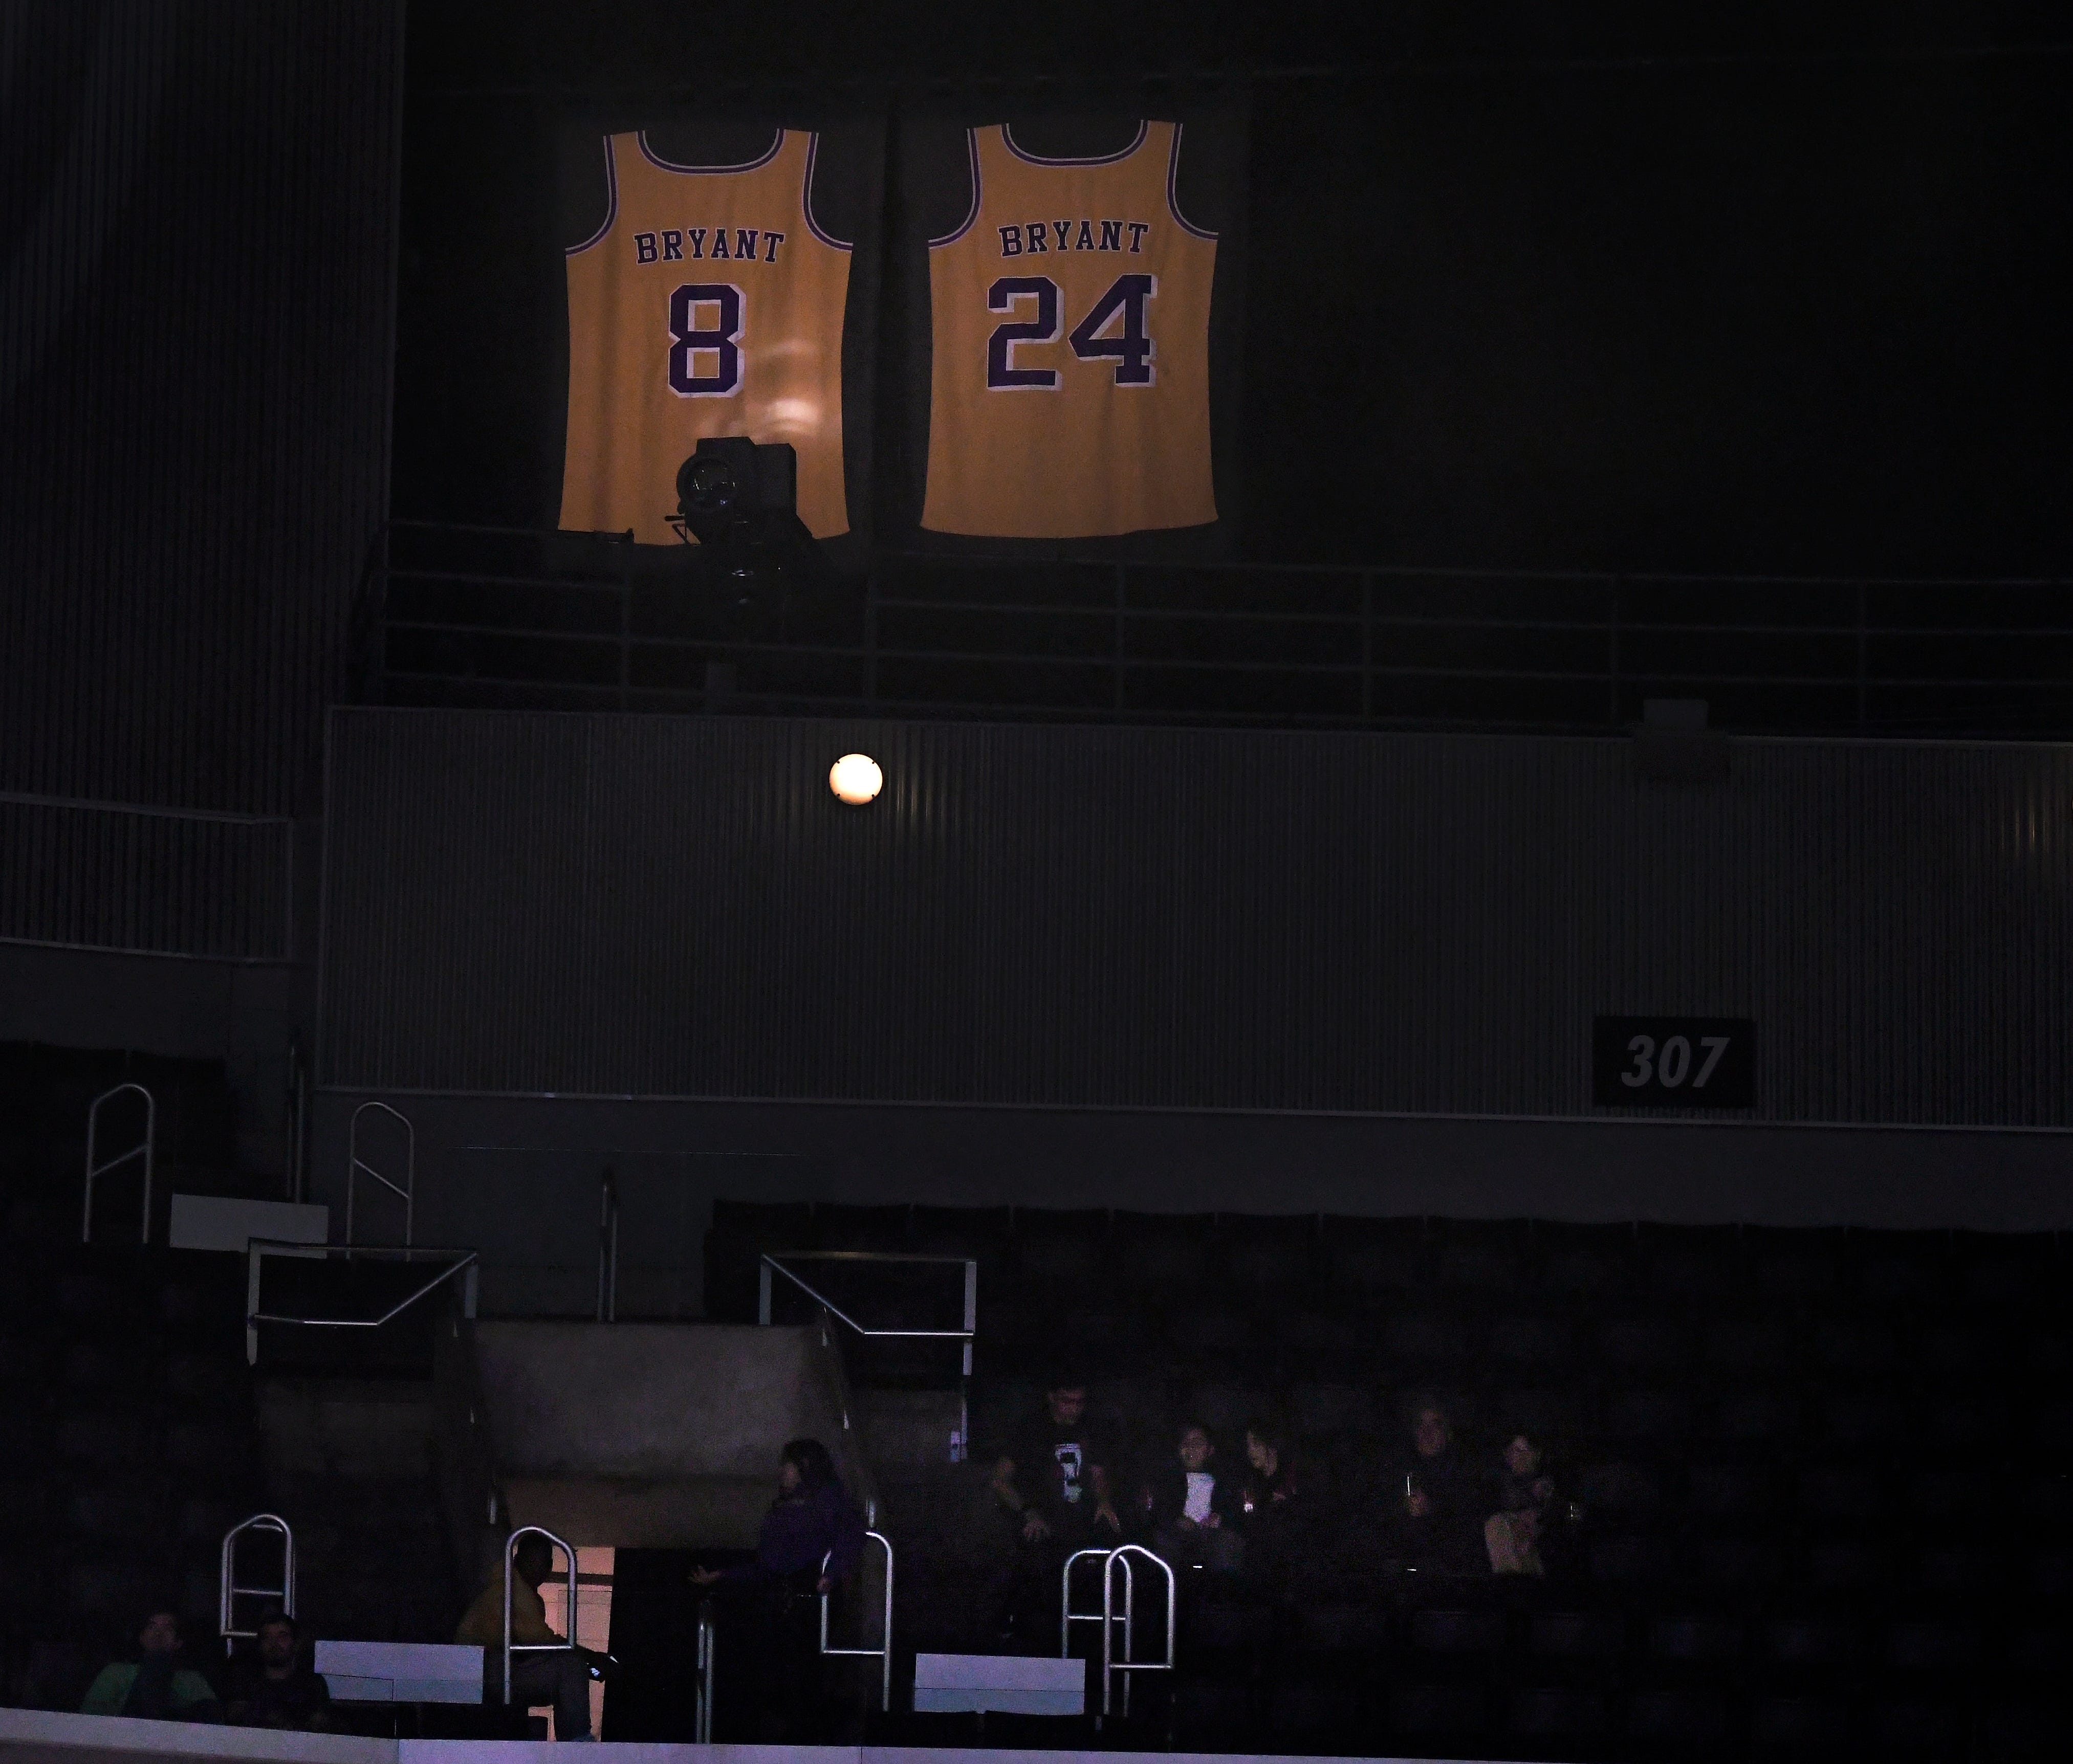 retired clippers jerseys